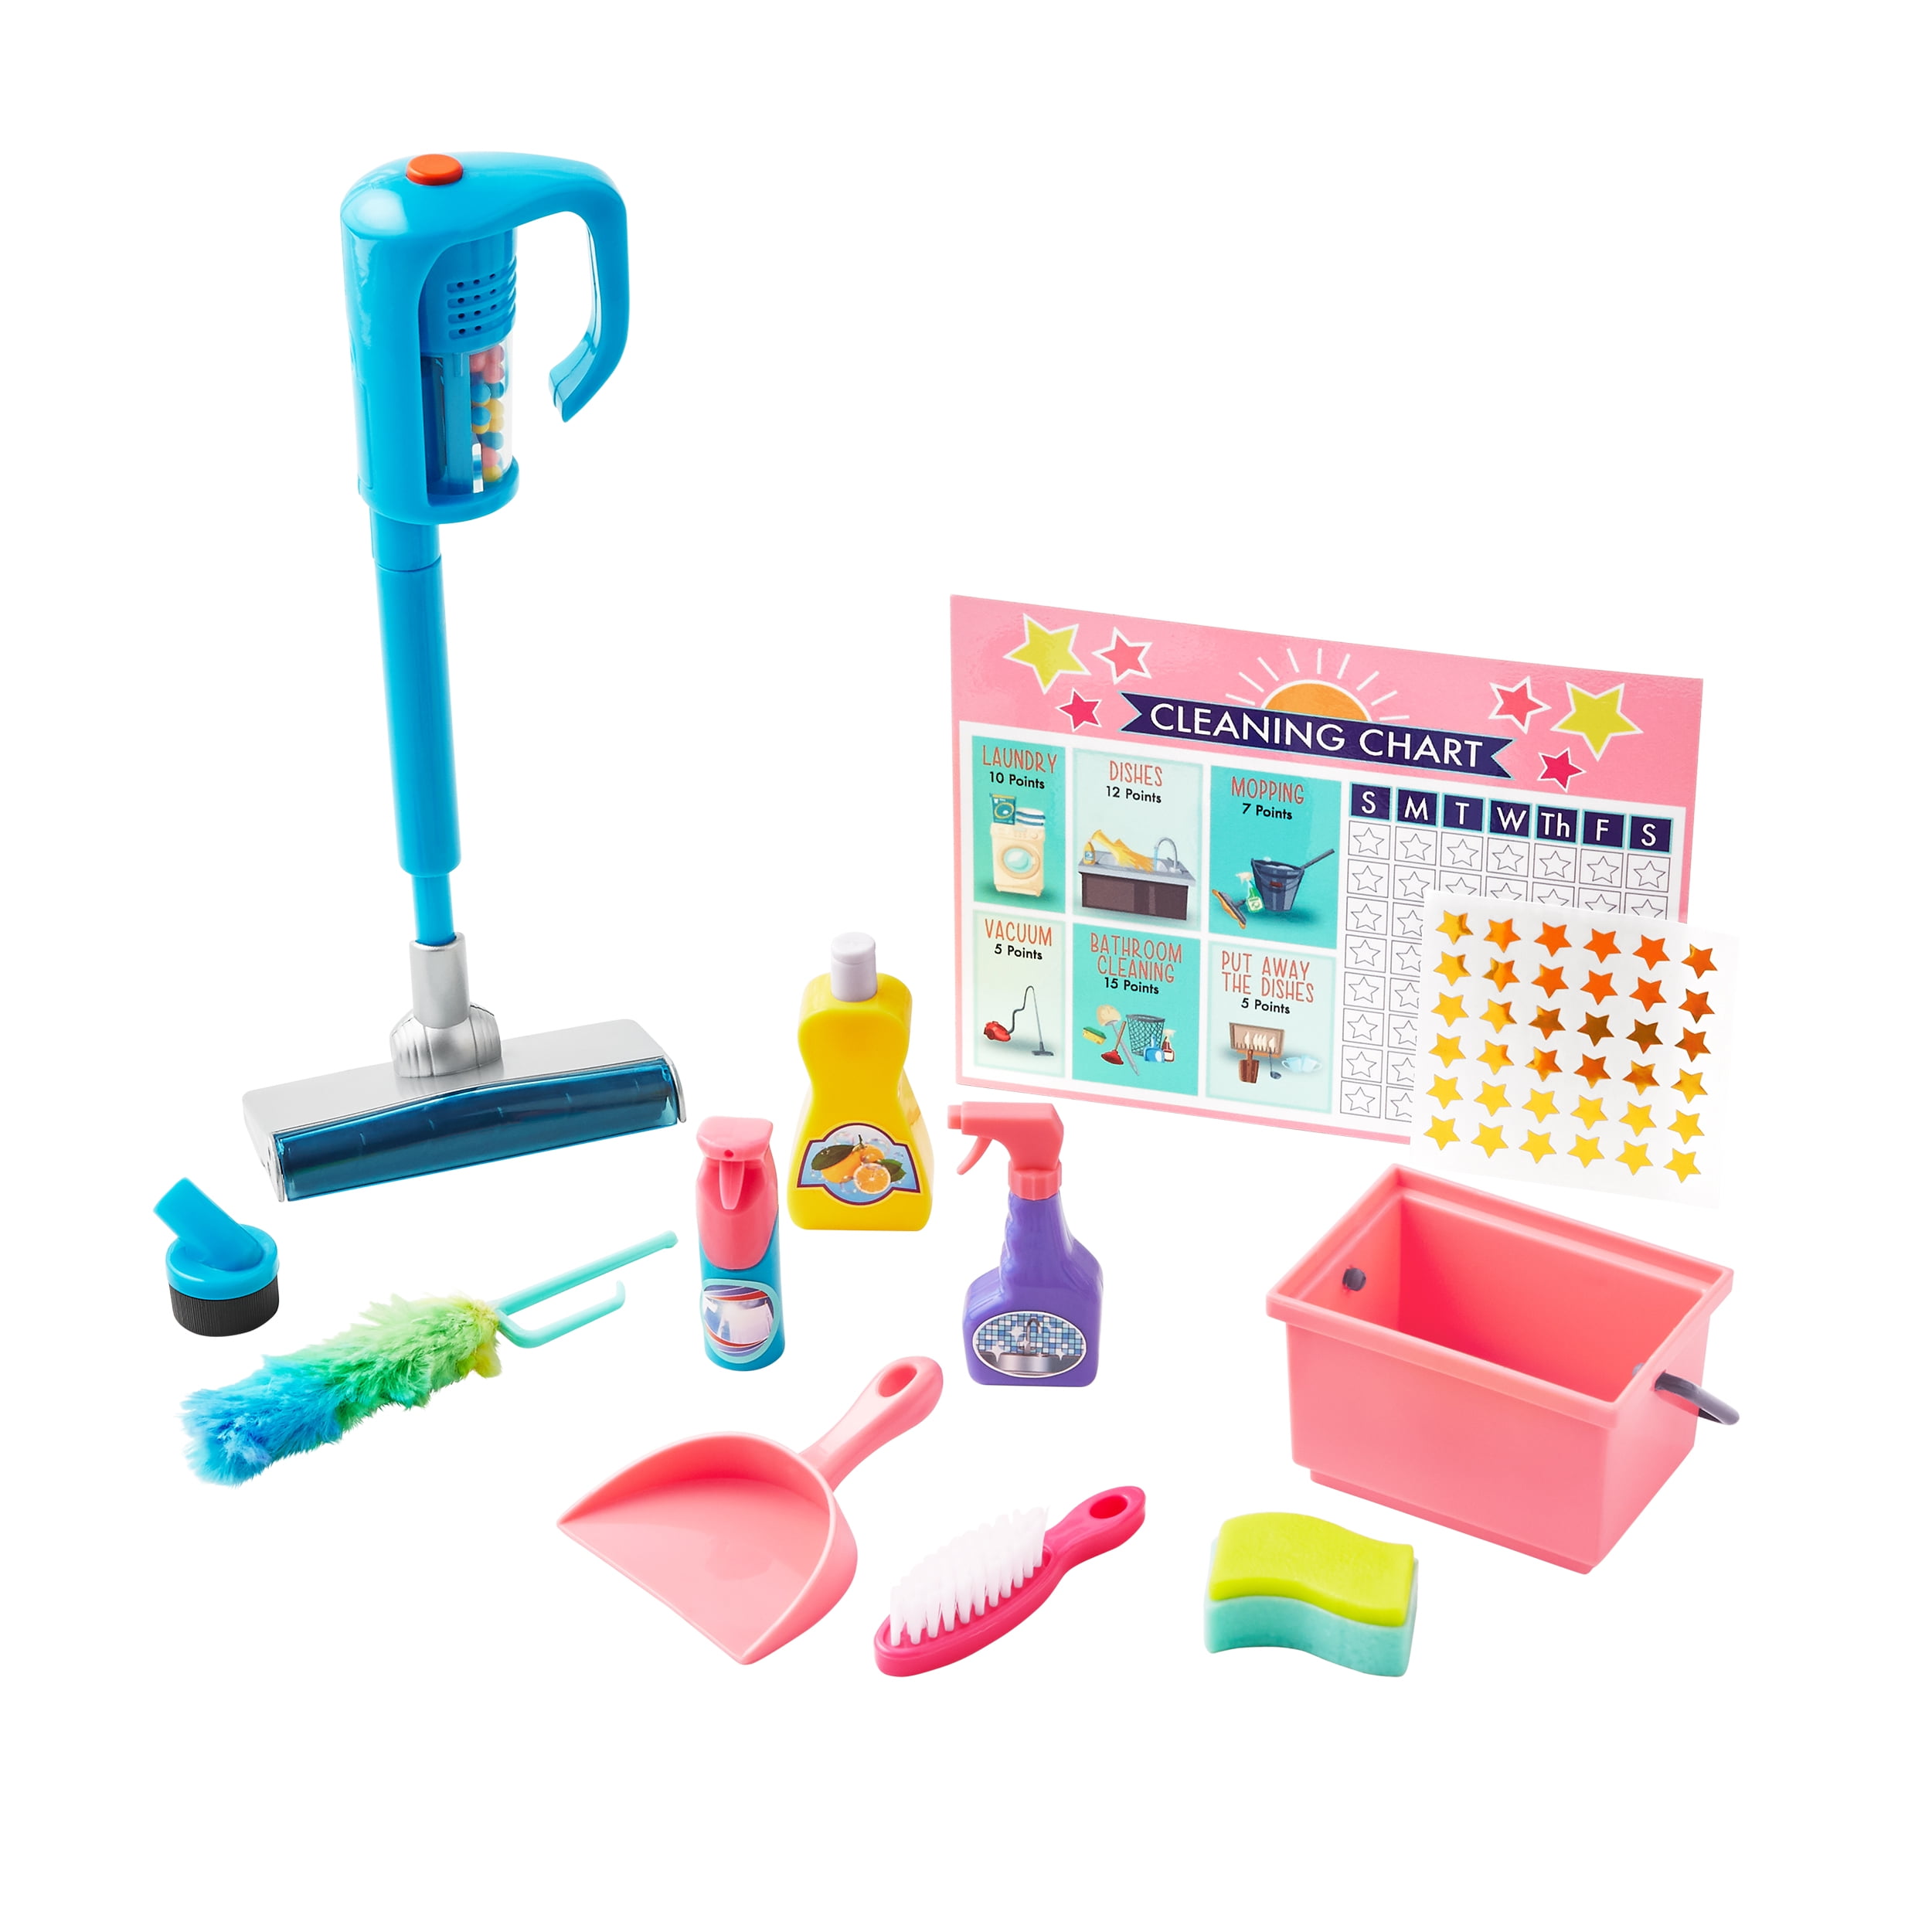 WalMart SG_B074W2F2FP_US Colors May Vary My Life As Laundry Room Playset